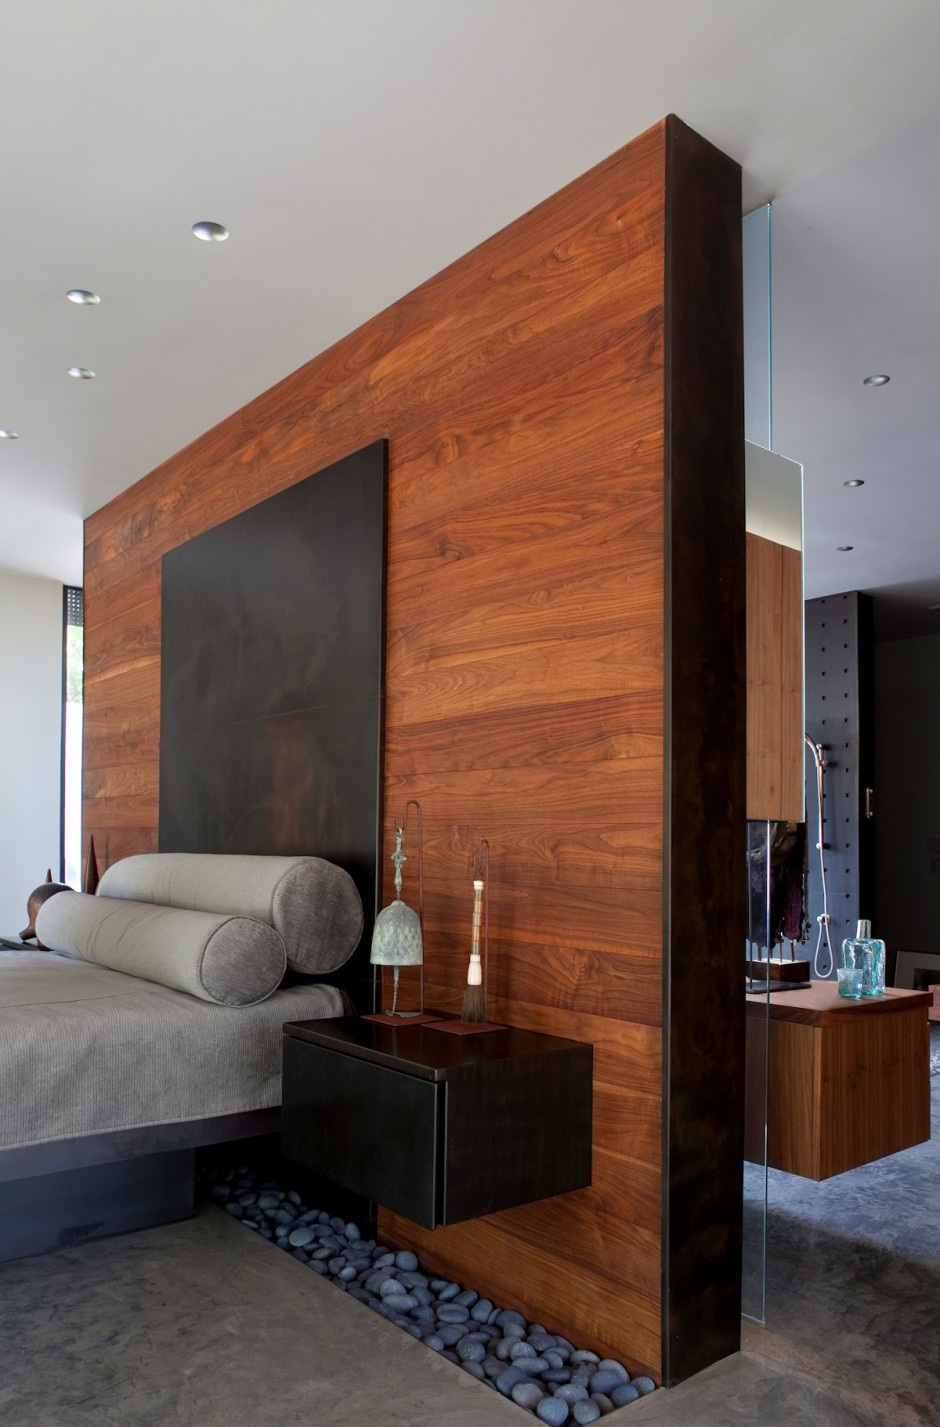 Wooden Wall In Bedroom
 52 Master Bedroom Ideas That Go Beyond The Basics